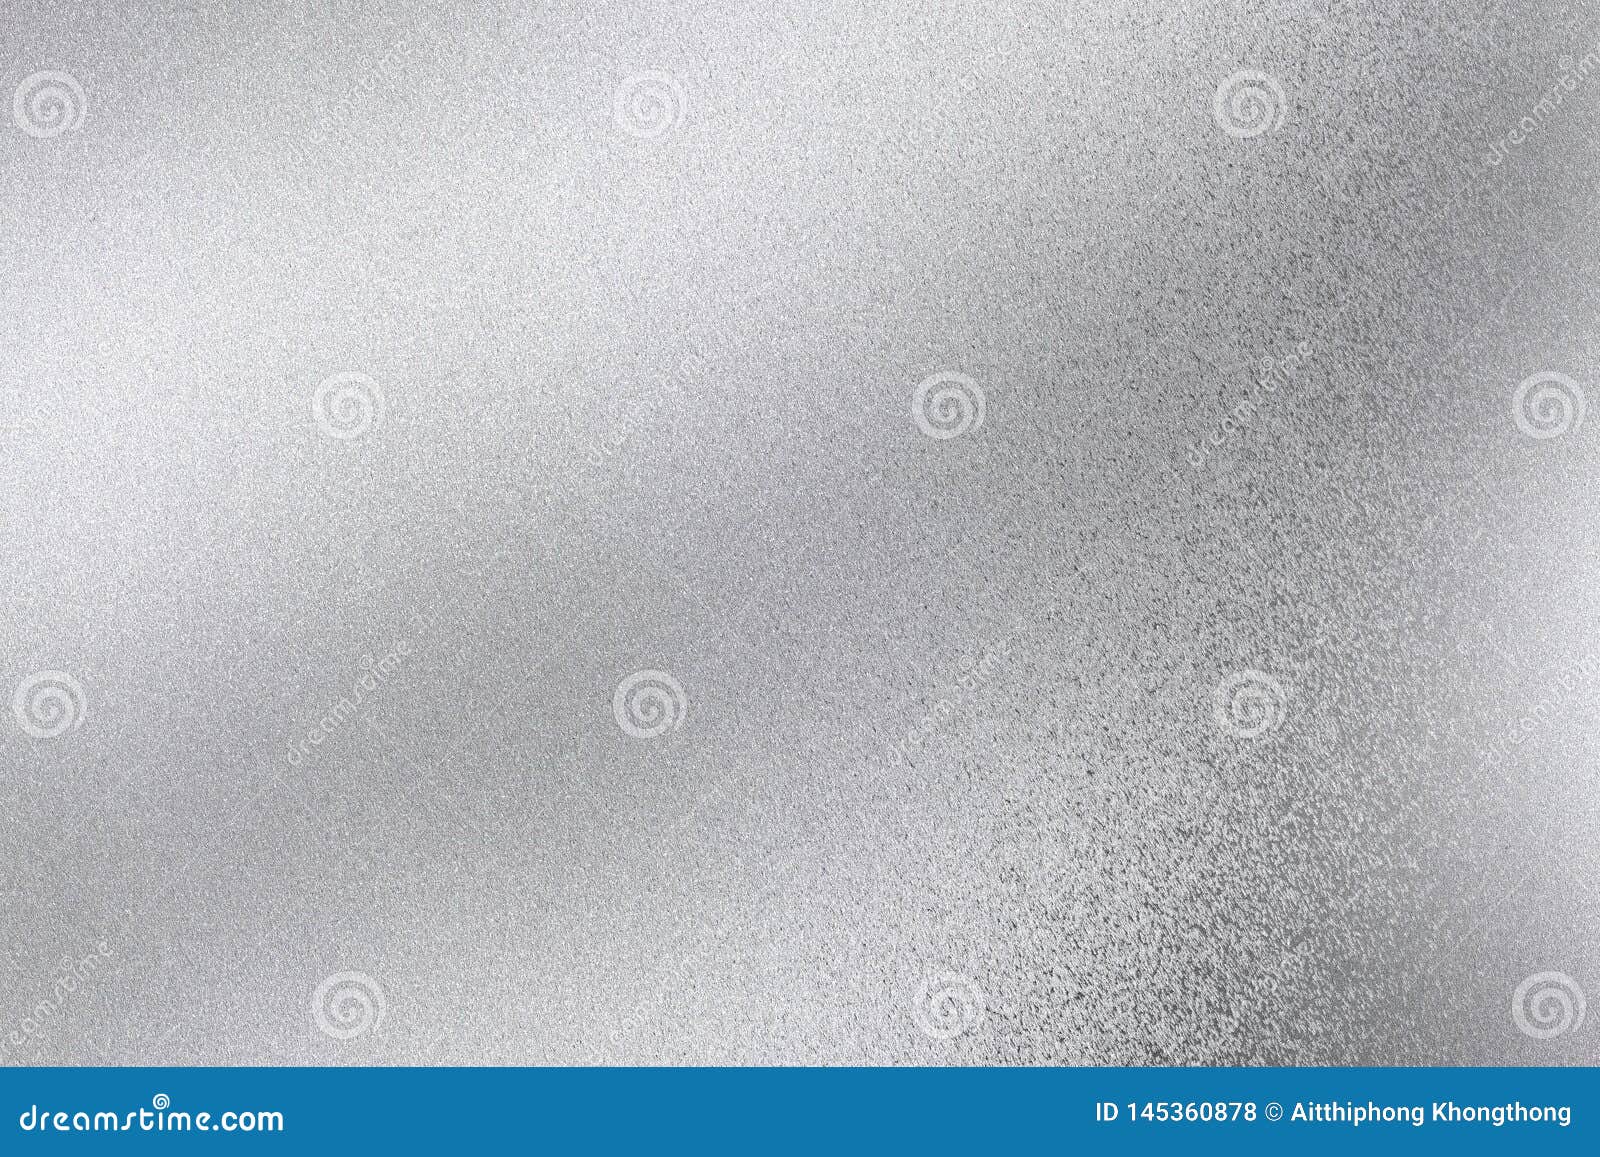 Abstract Texture Background, Dirty on Silver Metal Sheet Stock Photo ...